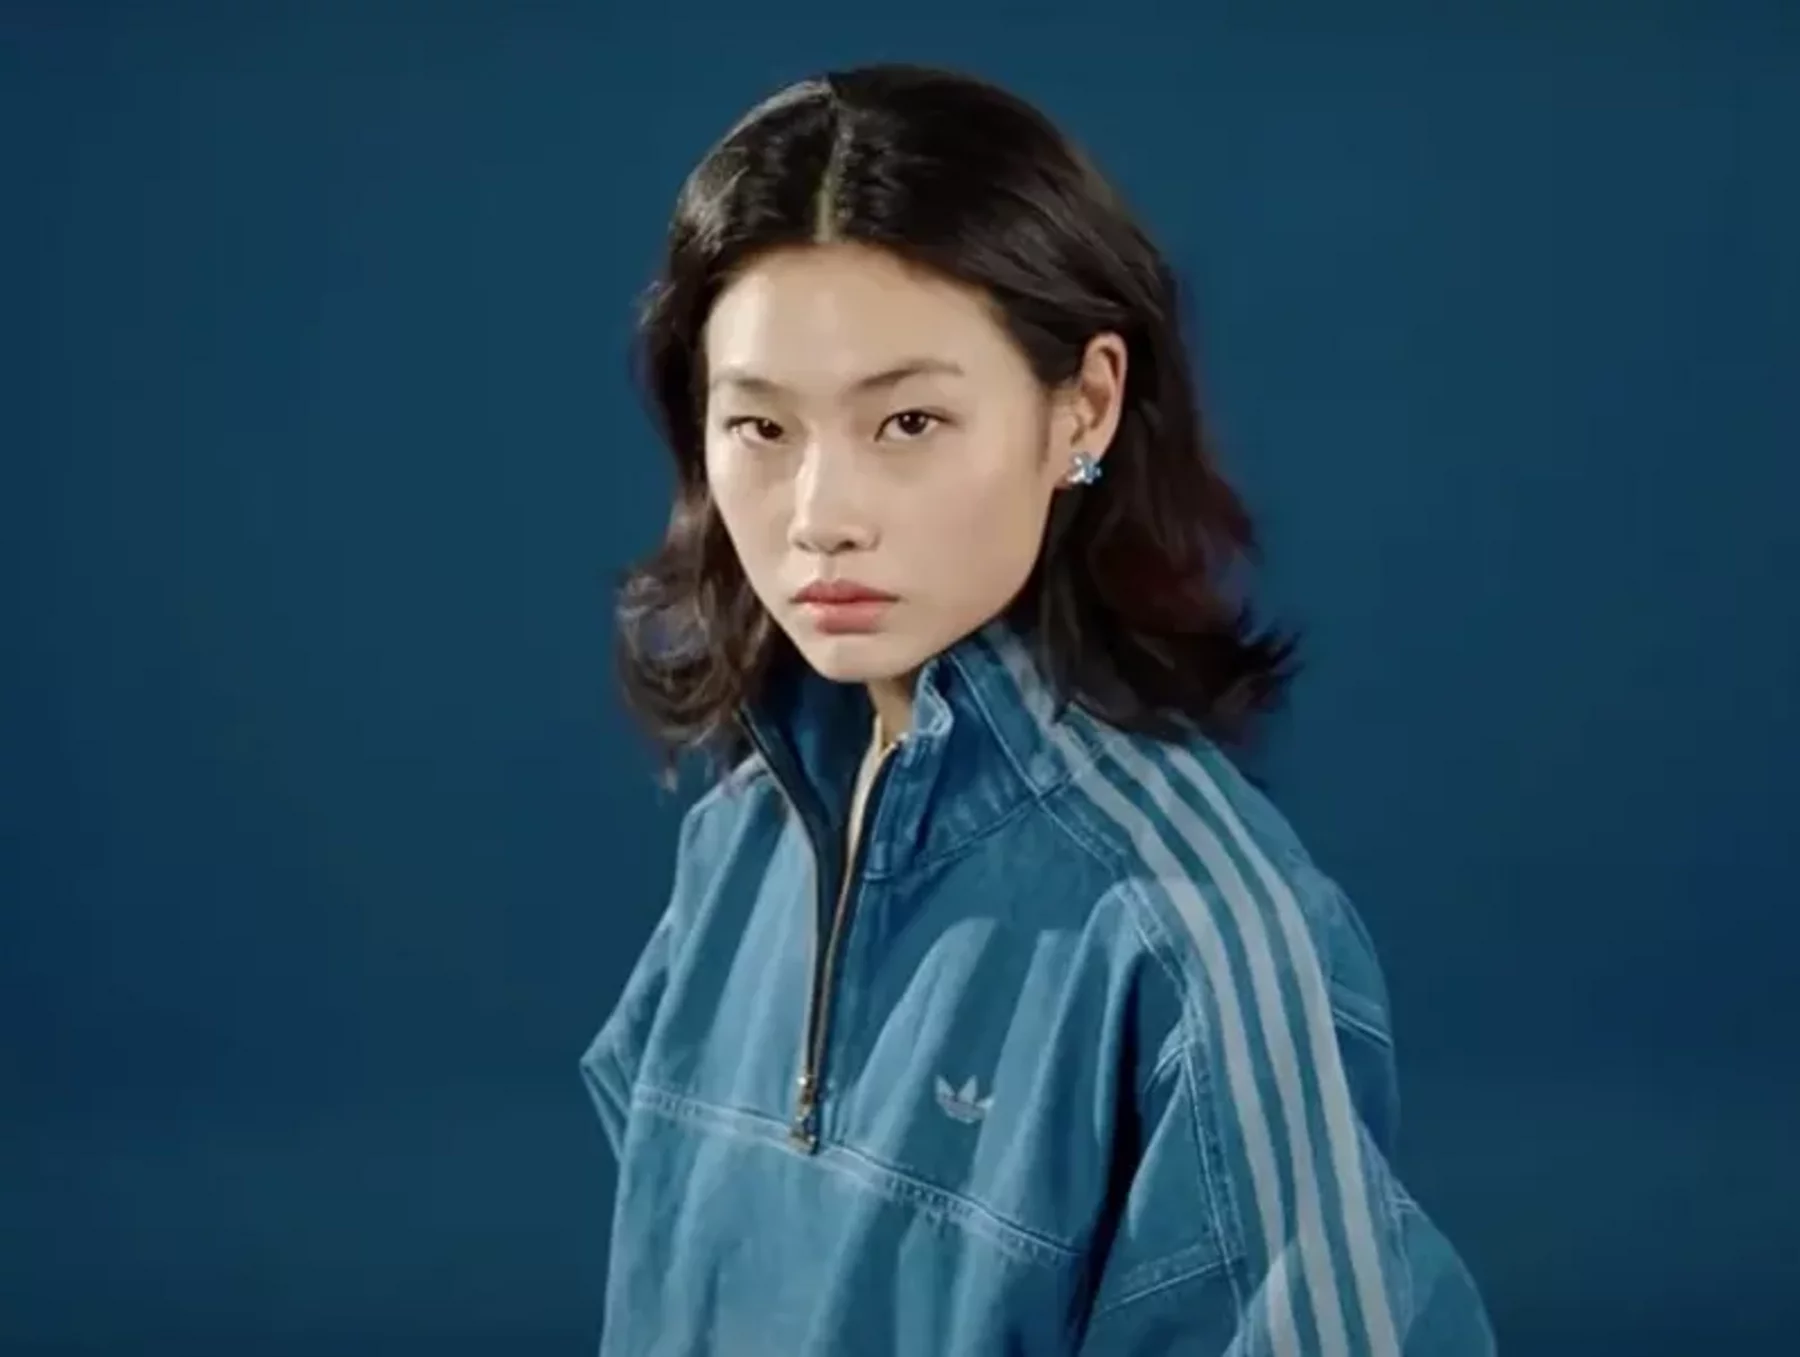 Squid Game's HoYeon Jung Among Inspirational Women Championed In Adidas Ad